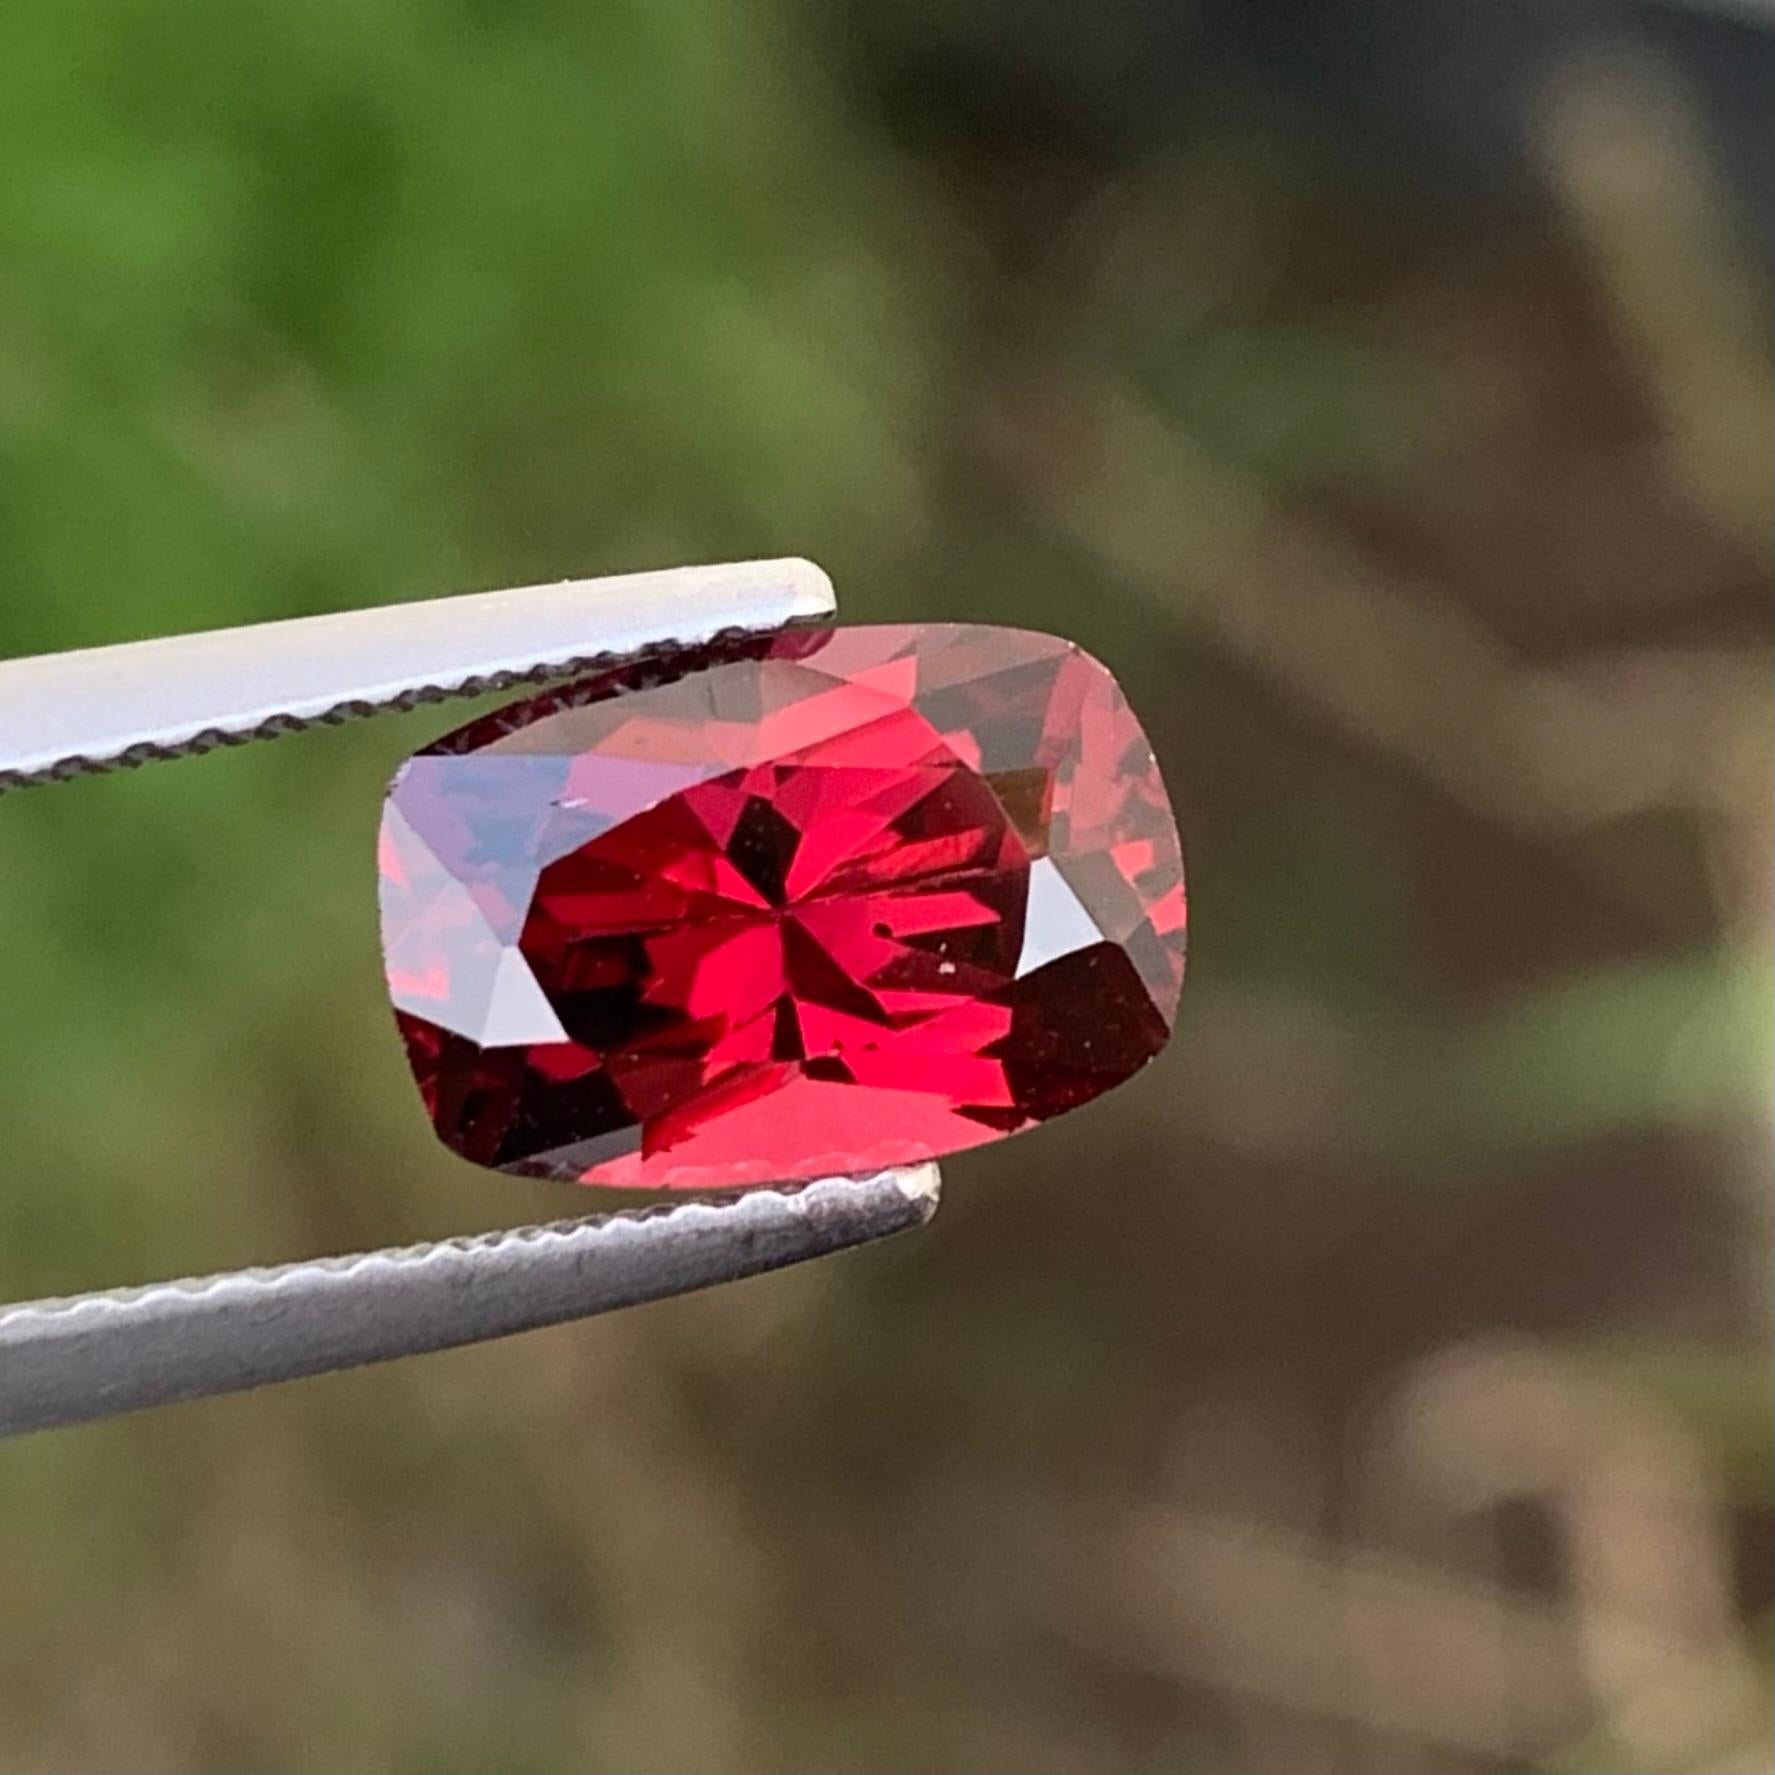 Loose Rhodolite Garnet
Weight: 2.85 Carats 
Dimension: 9.3x6.6x5.1 Mm
Origin: Tanzania 
Shape: Oval
Color: Red 
Treatment: Non
Certificate: On Demand
Rhodolite garnet is a remarkable gemstone cherished for its exquisite purplish-red or raspberry-red